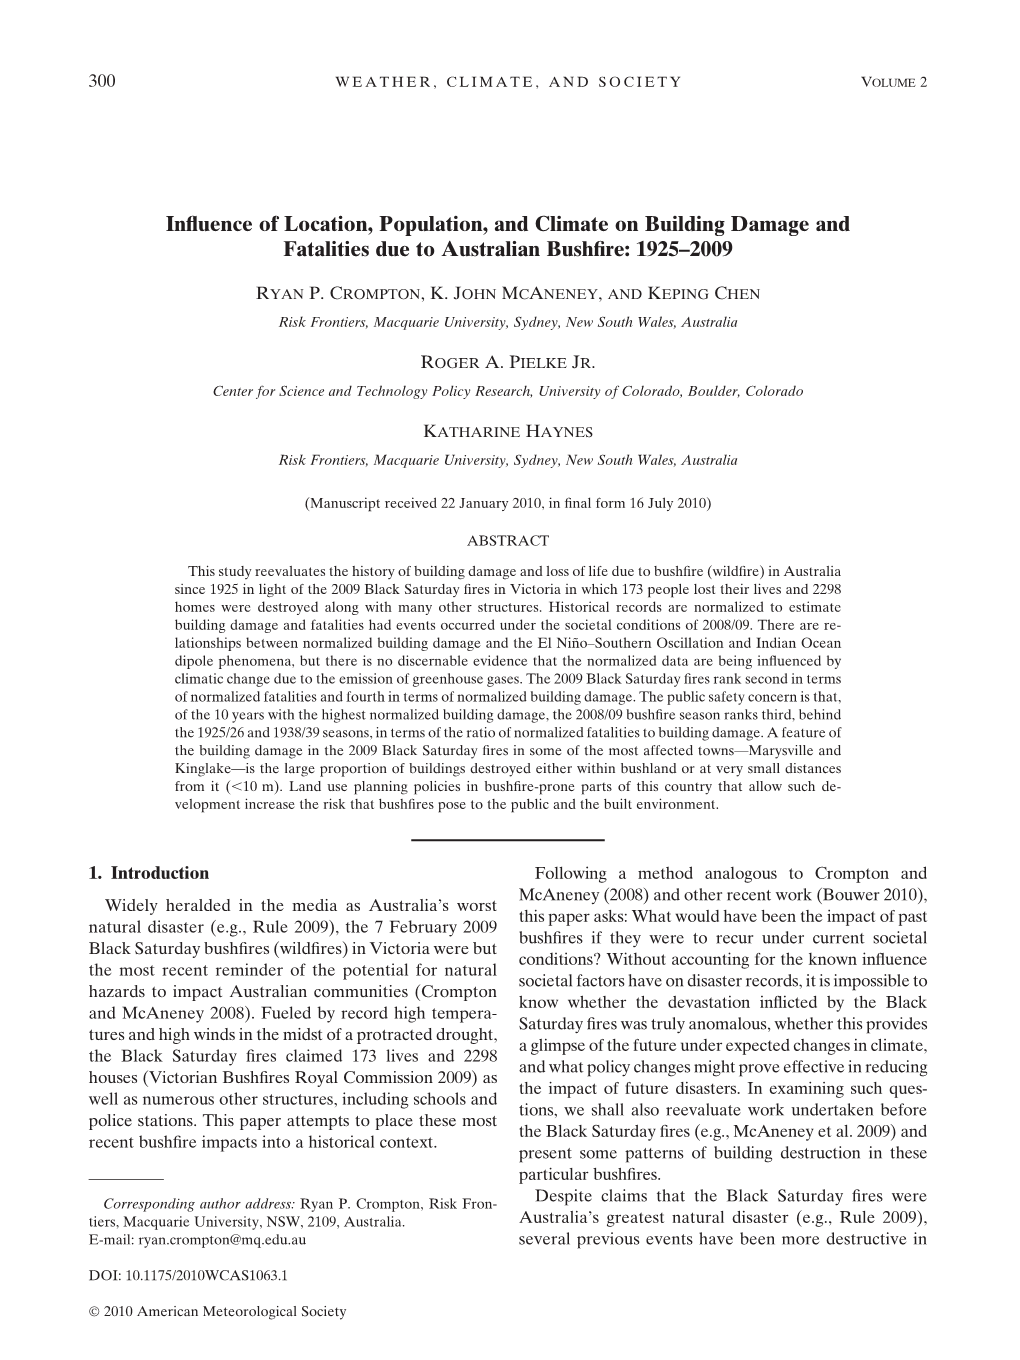 Influence of Location, Population, and Climate on Building Damage And